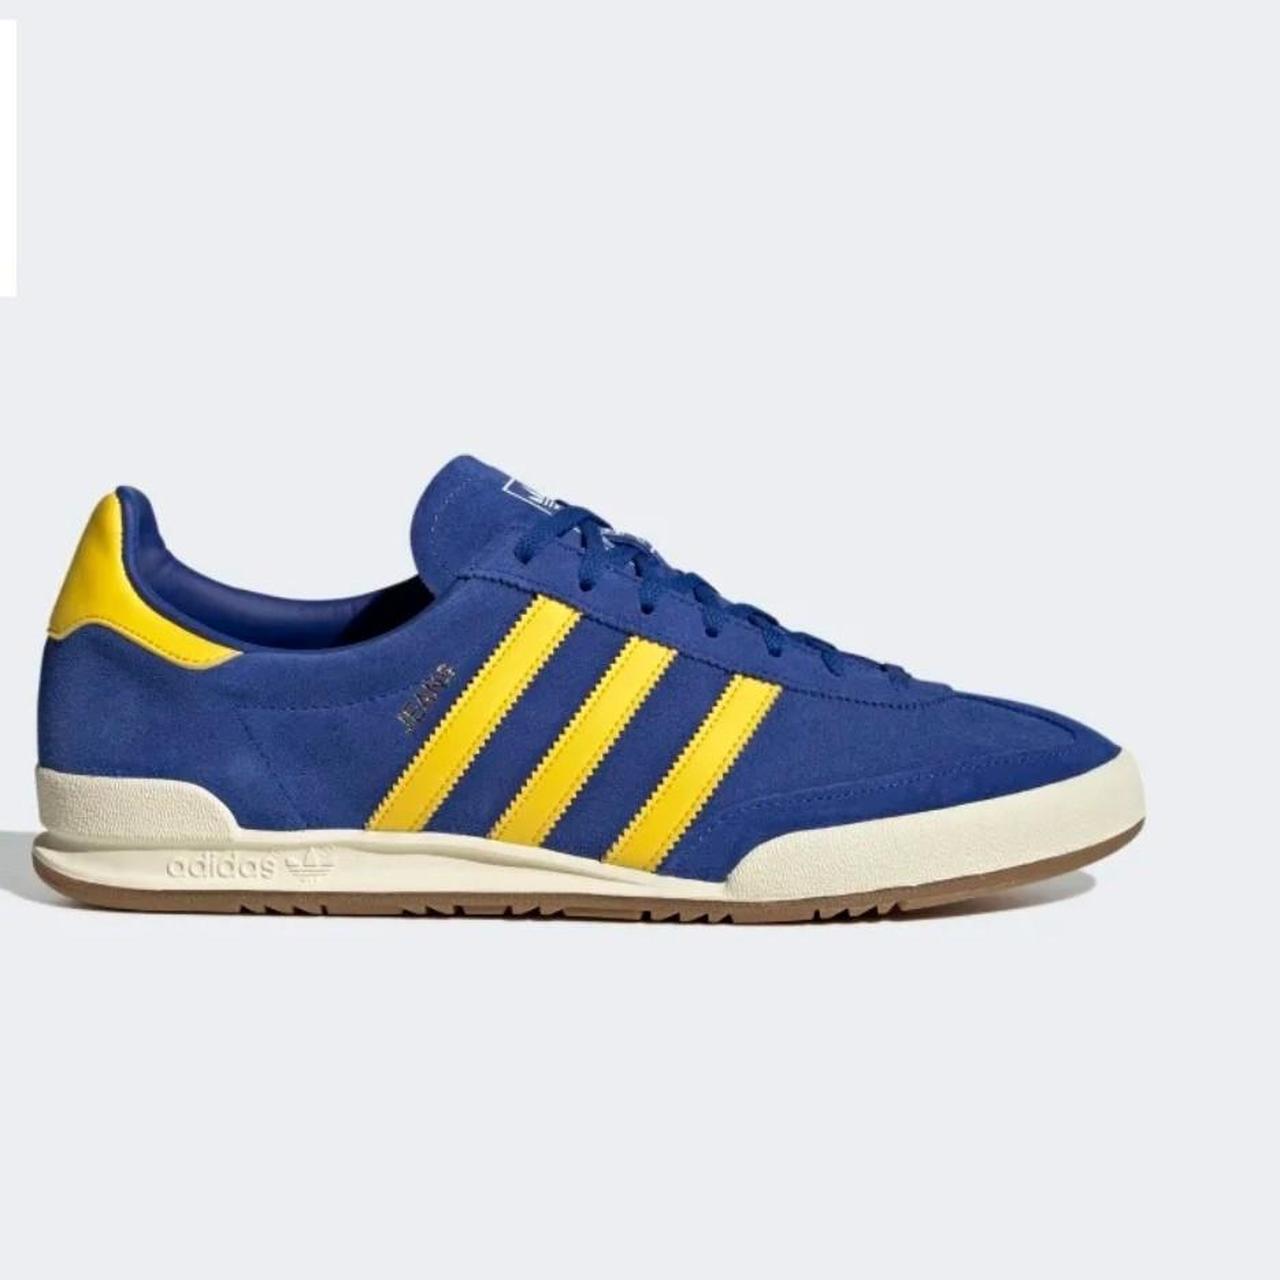 Adidas Men's Blue and Yellow Trainers | Depop